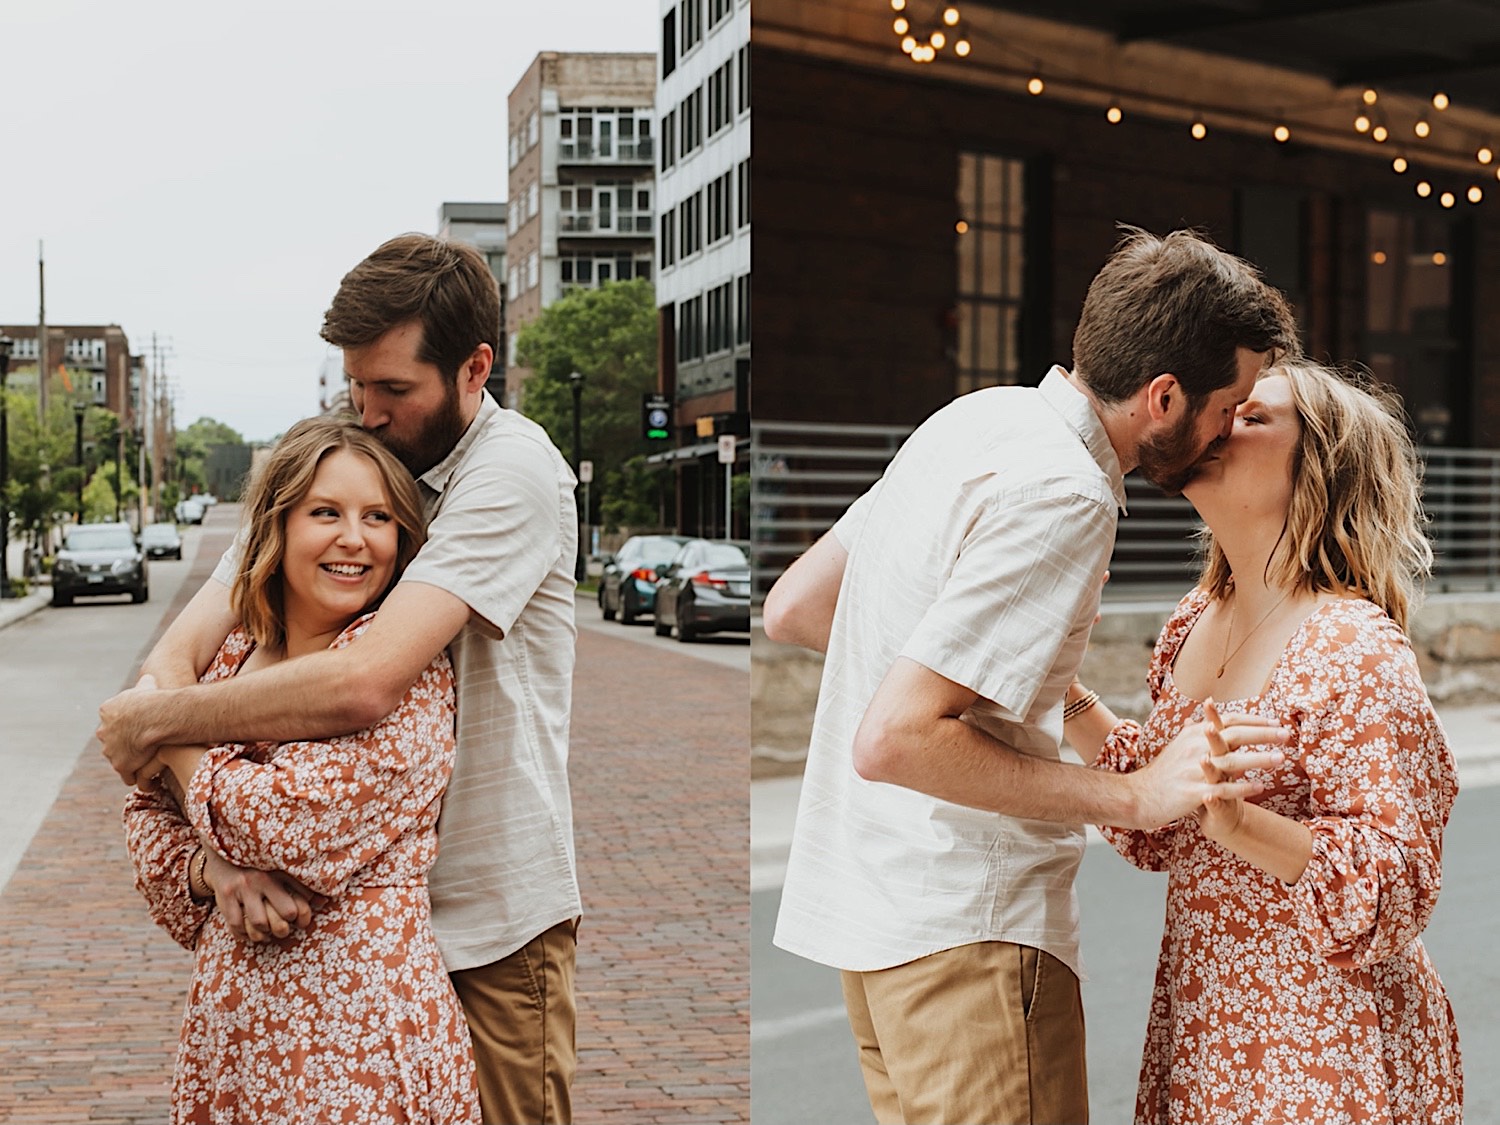 2 photos side by side of a couple, the left is of a man hugging a woman from behind and kissing her head, the right is of the two kissing while under string lights